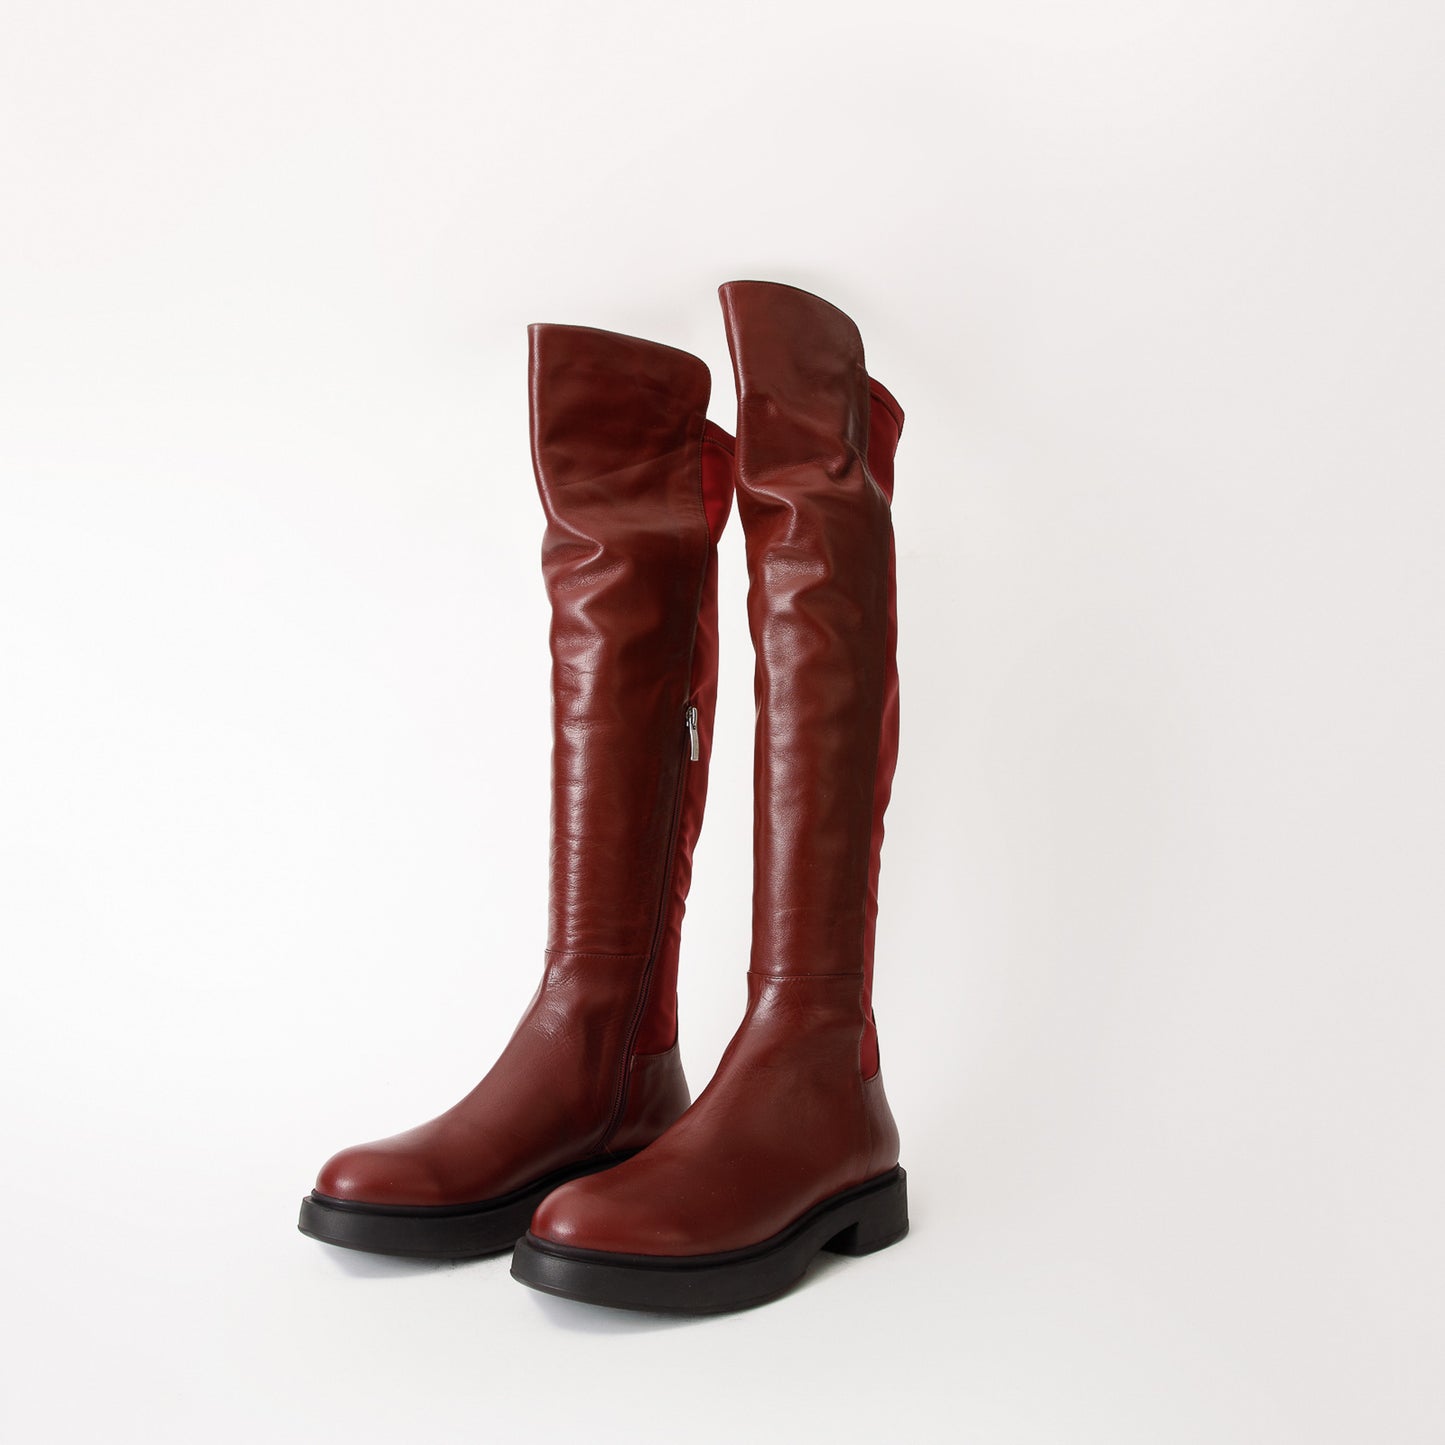 The  Harmony Belle Burgundy Leather Knee High Women Boot